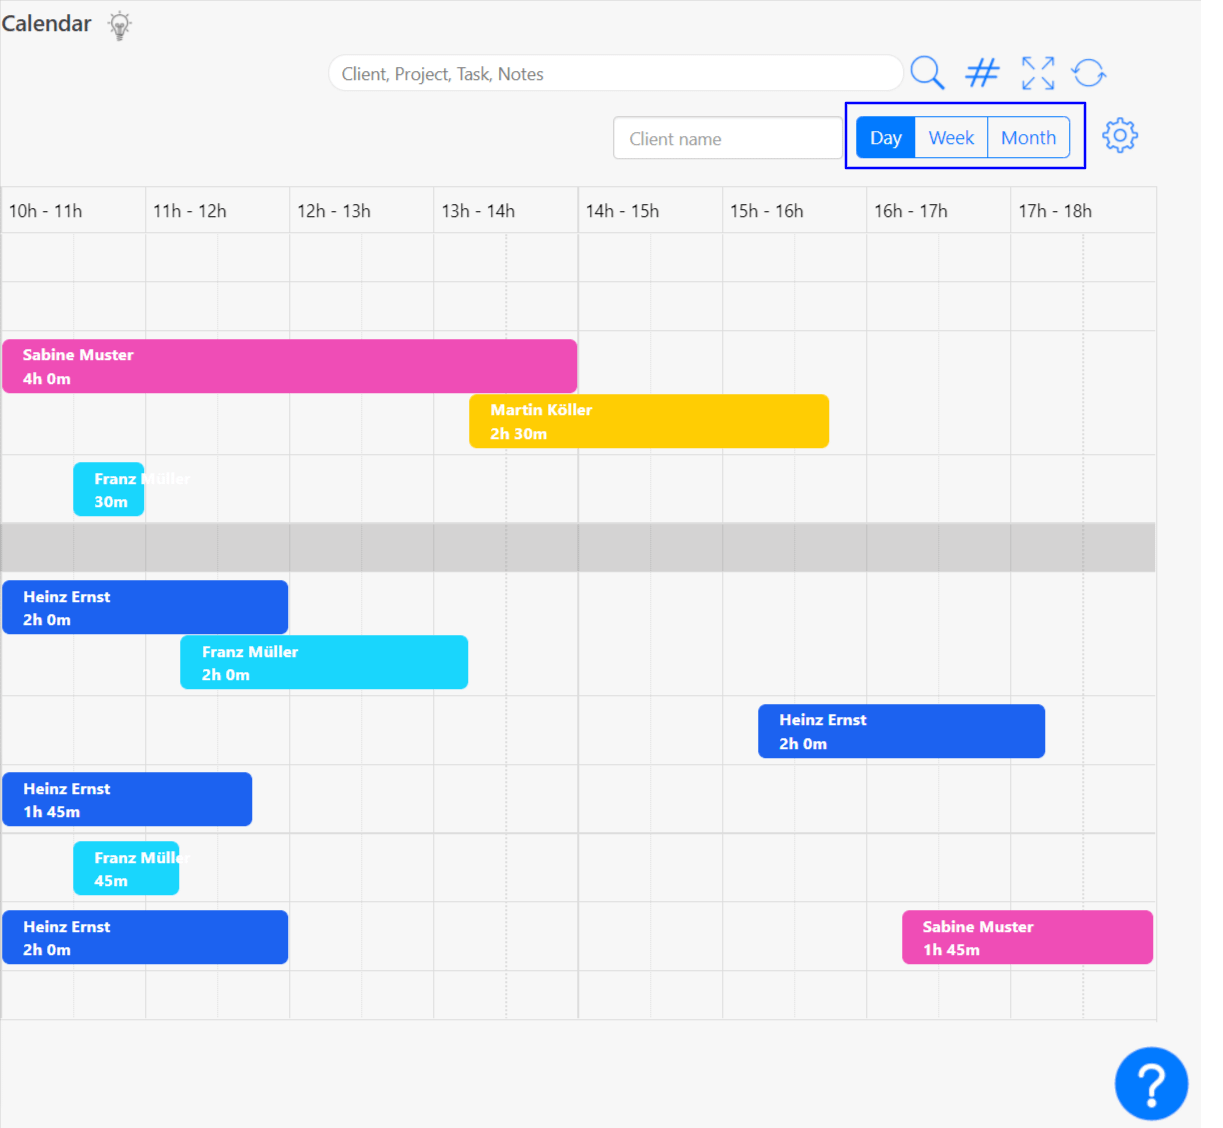 Appointment Planning - Calendar View